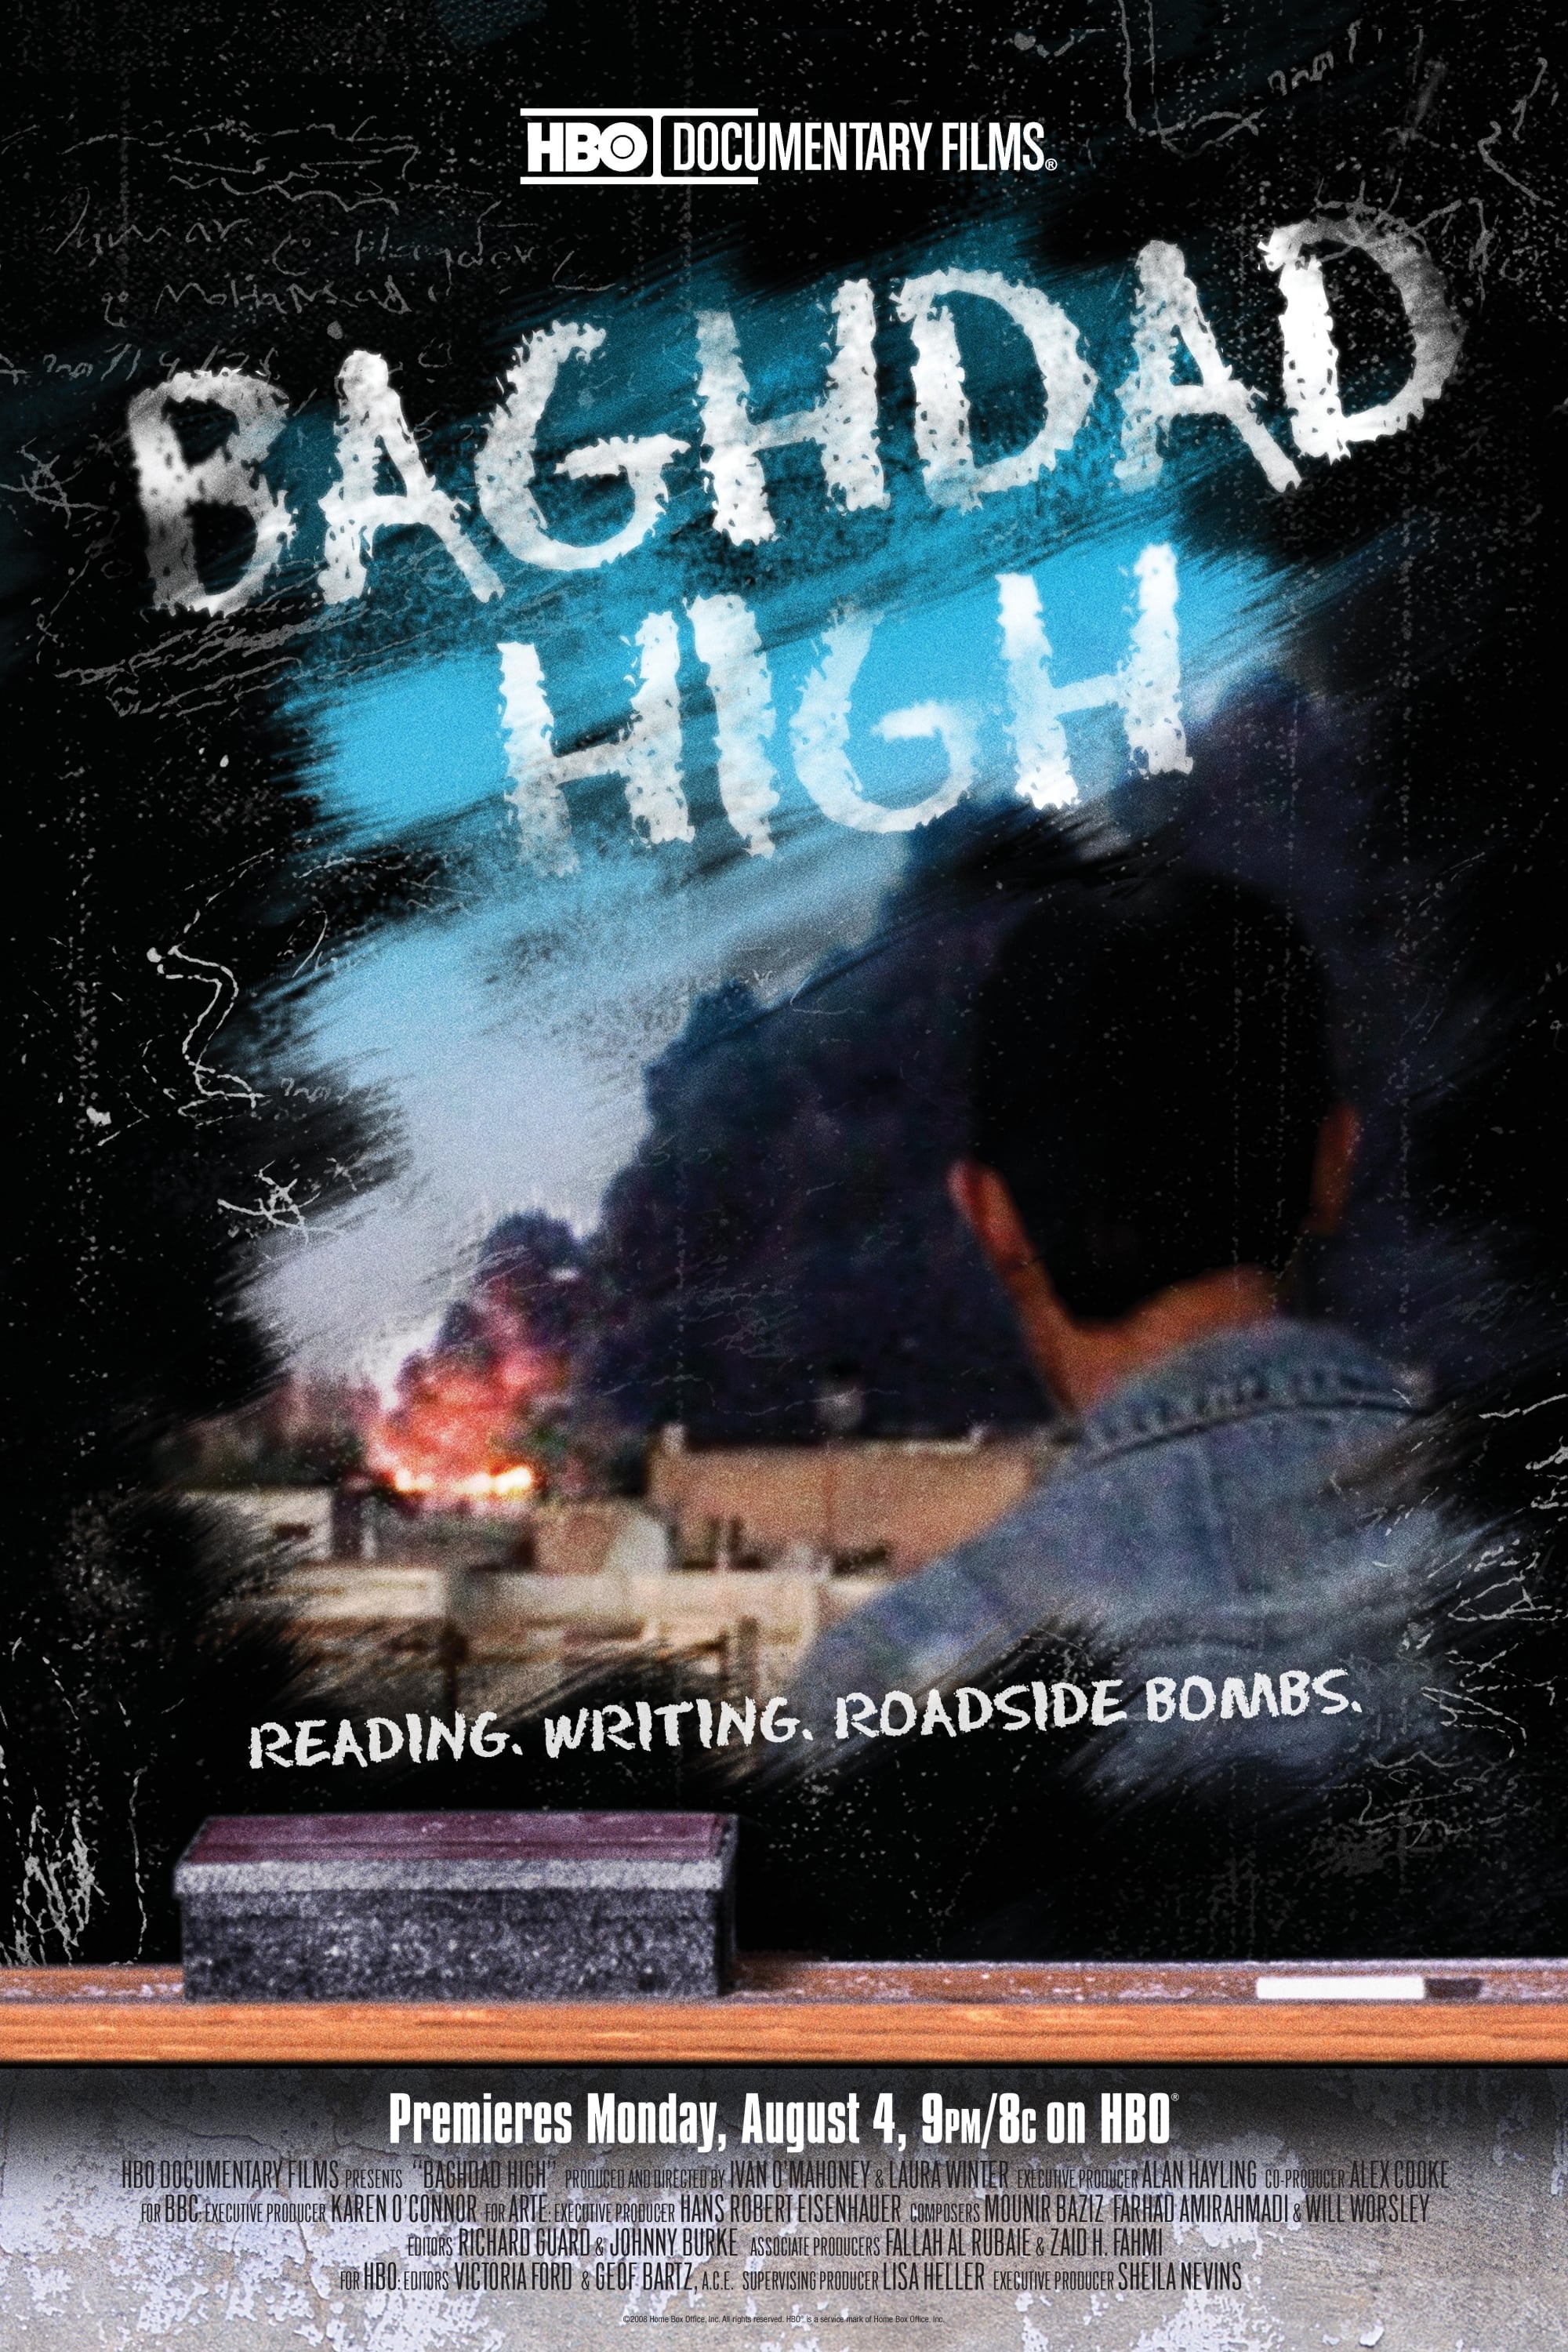 The Boys from Baghdad High